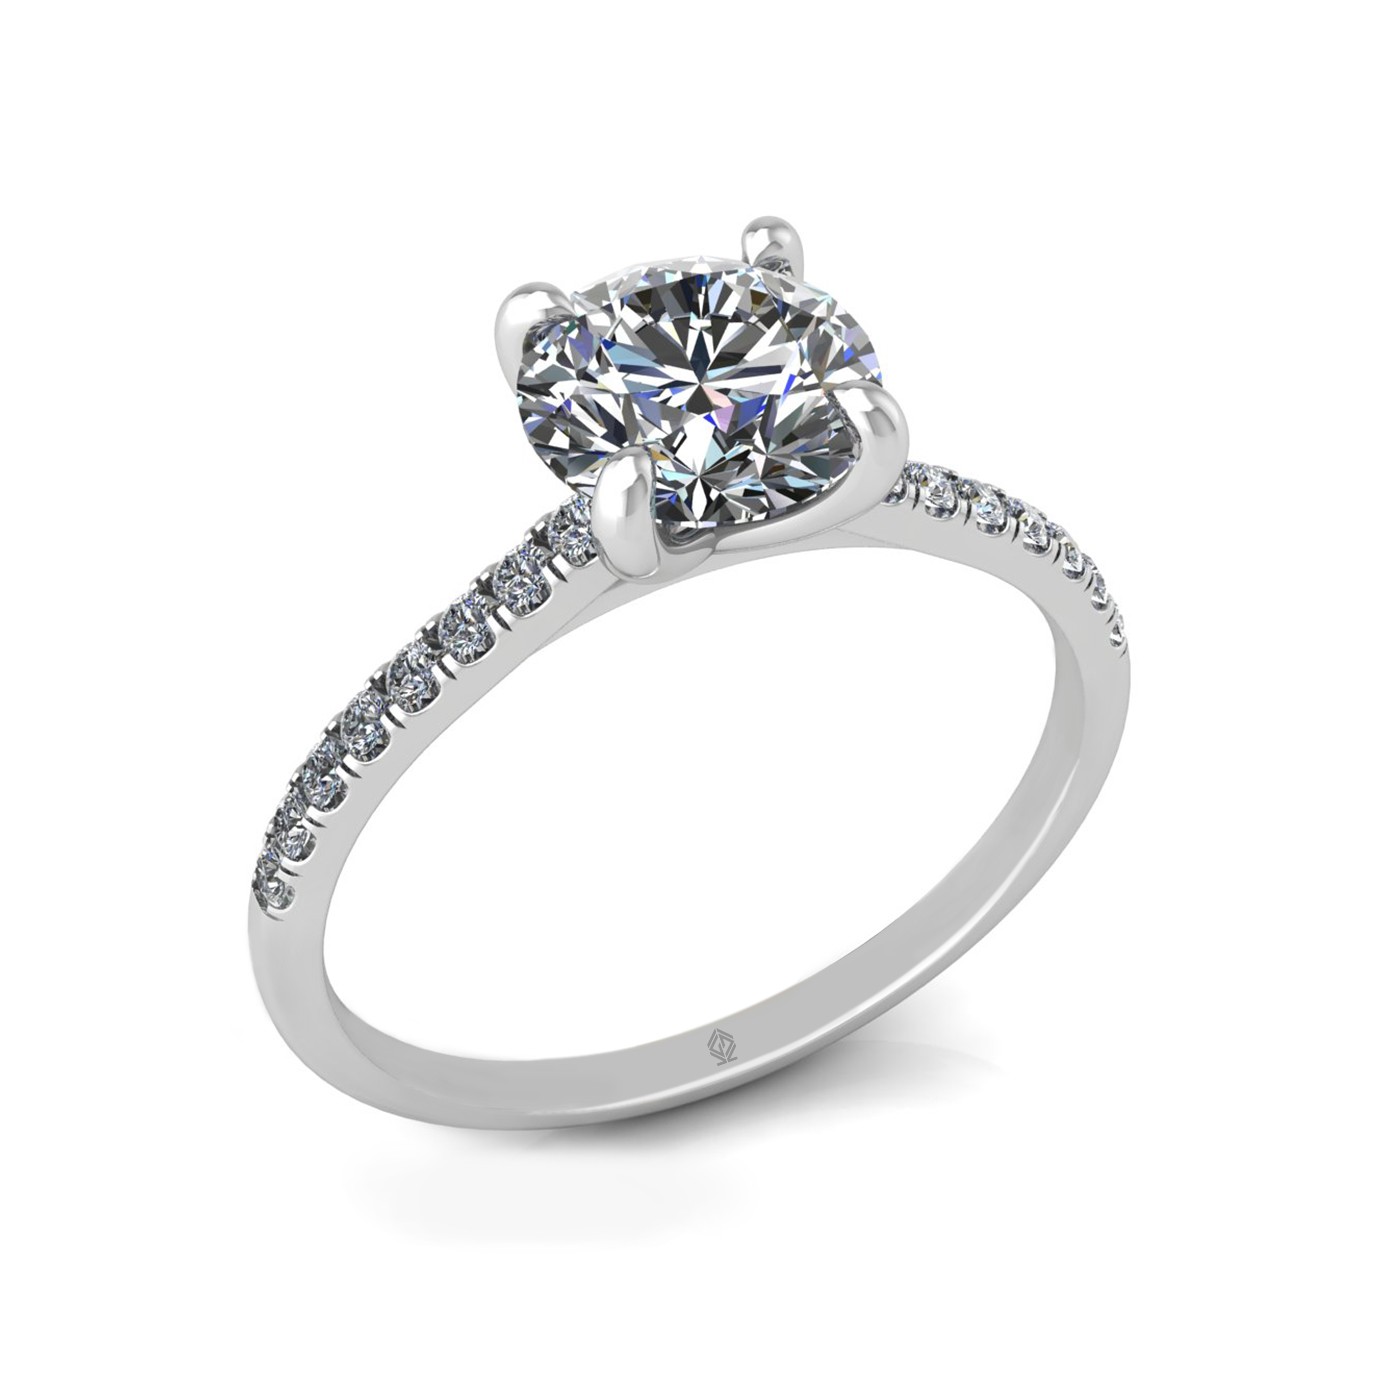 18k white gold 1.2ct 4 prongs round cut diamond engagement ring with whisper thin pavÉ set band